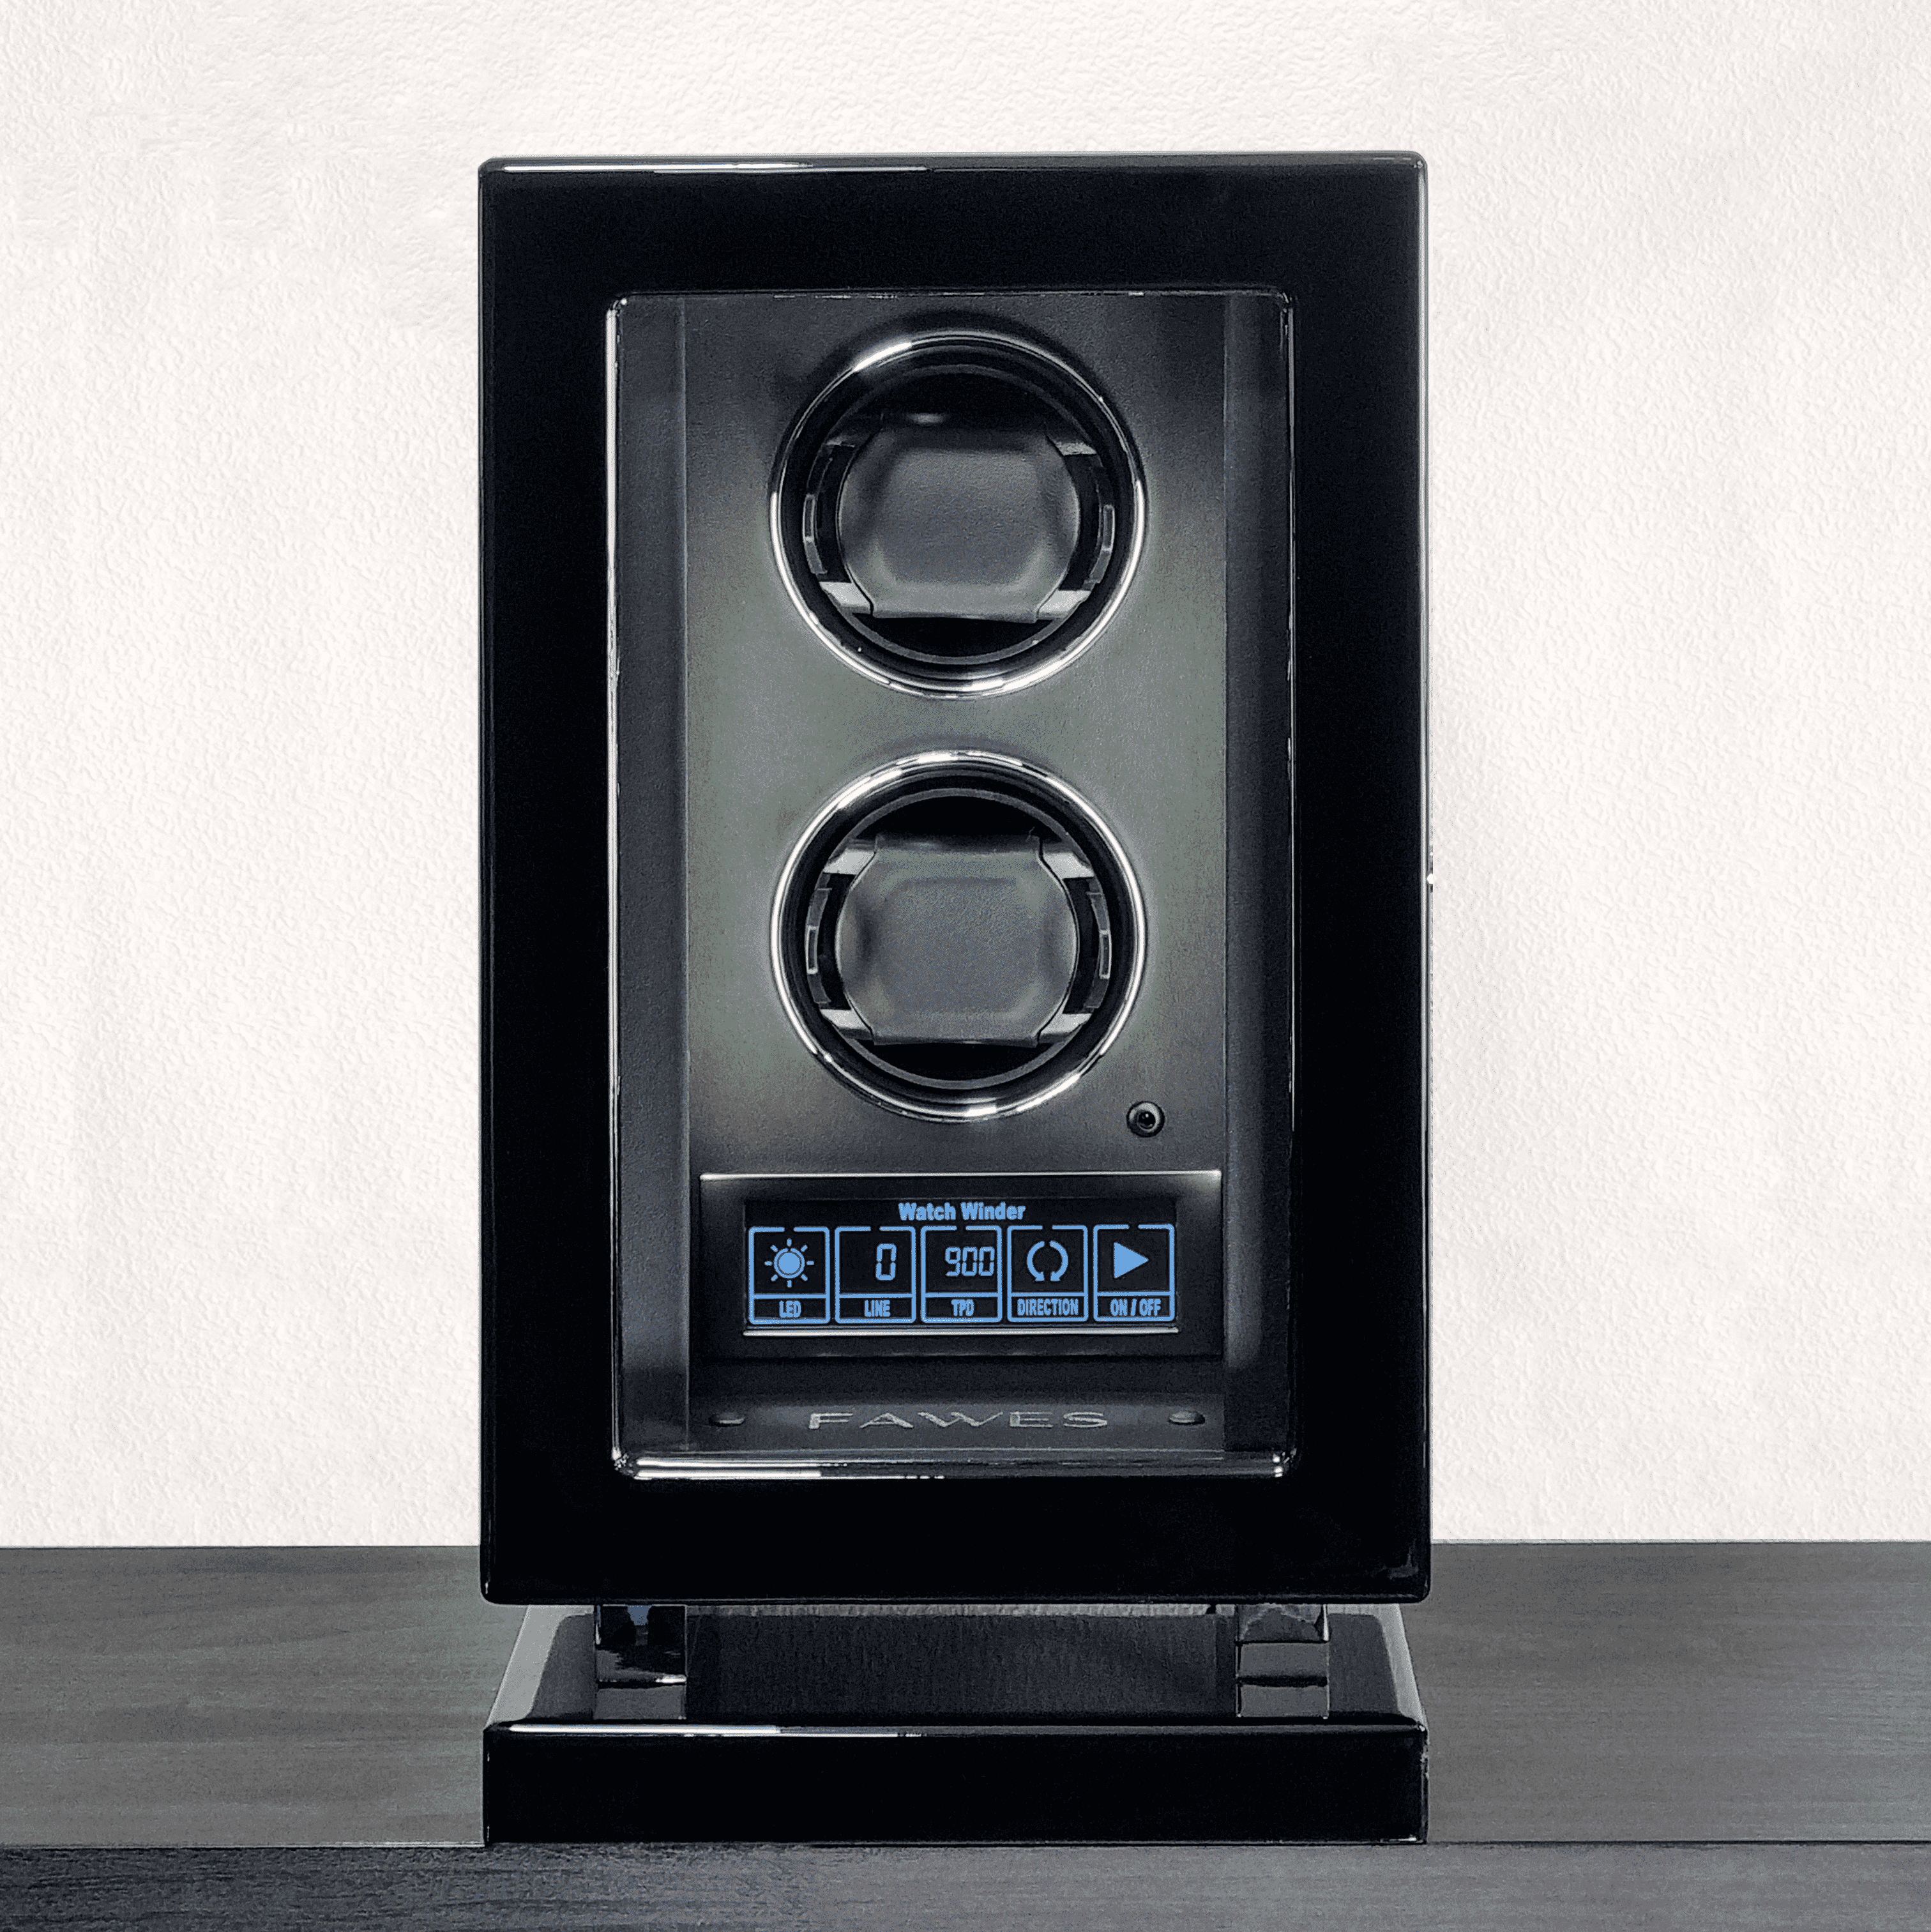 X63 Watch Winder with Biometric Access - 2 Epitope